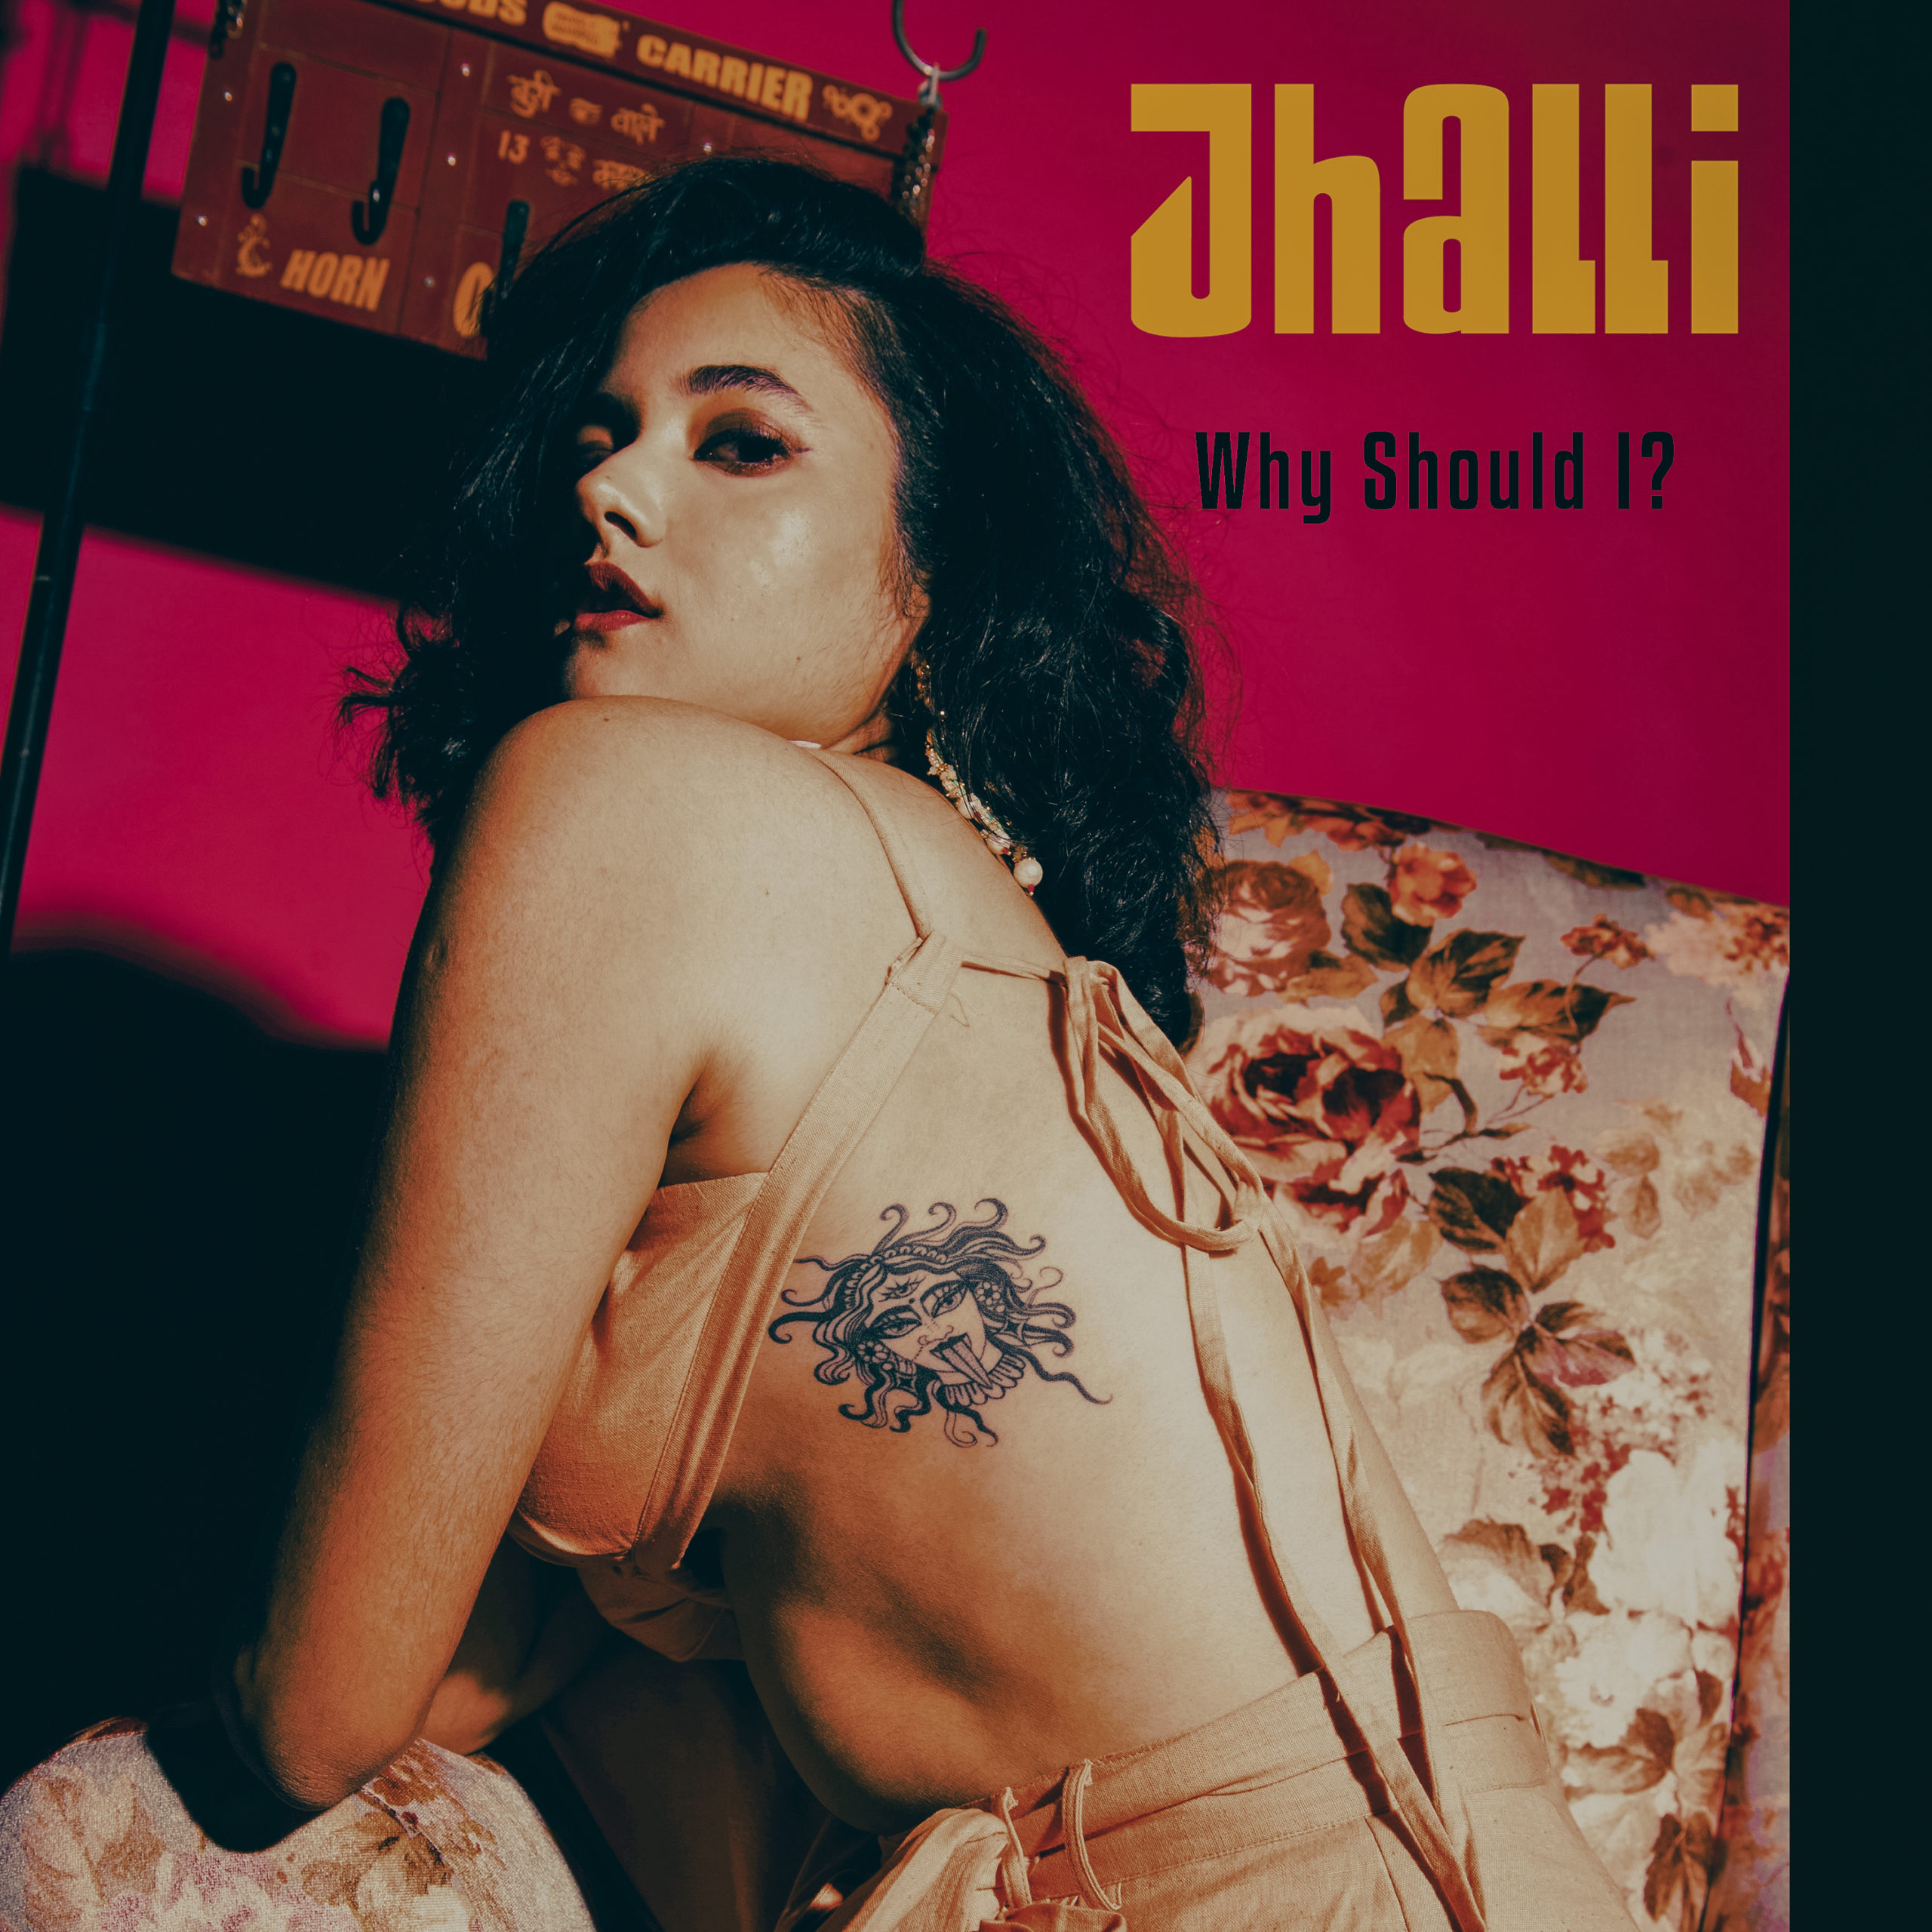 How Jhallis Grandmother Inspired Her to Write Her Debut EP Why Should